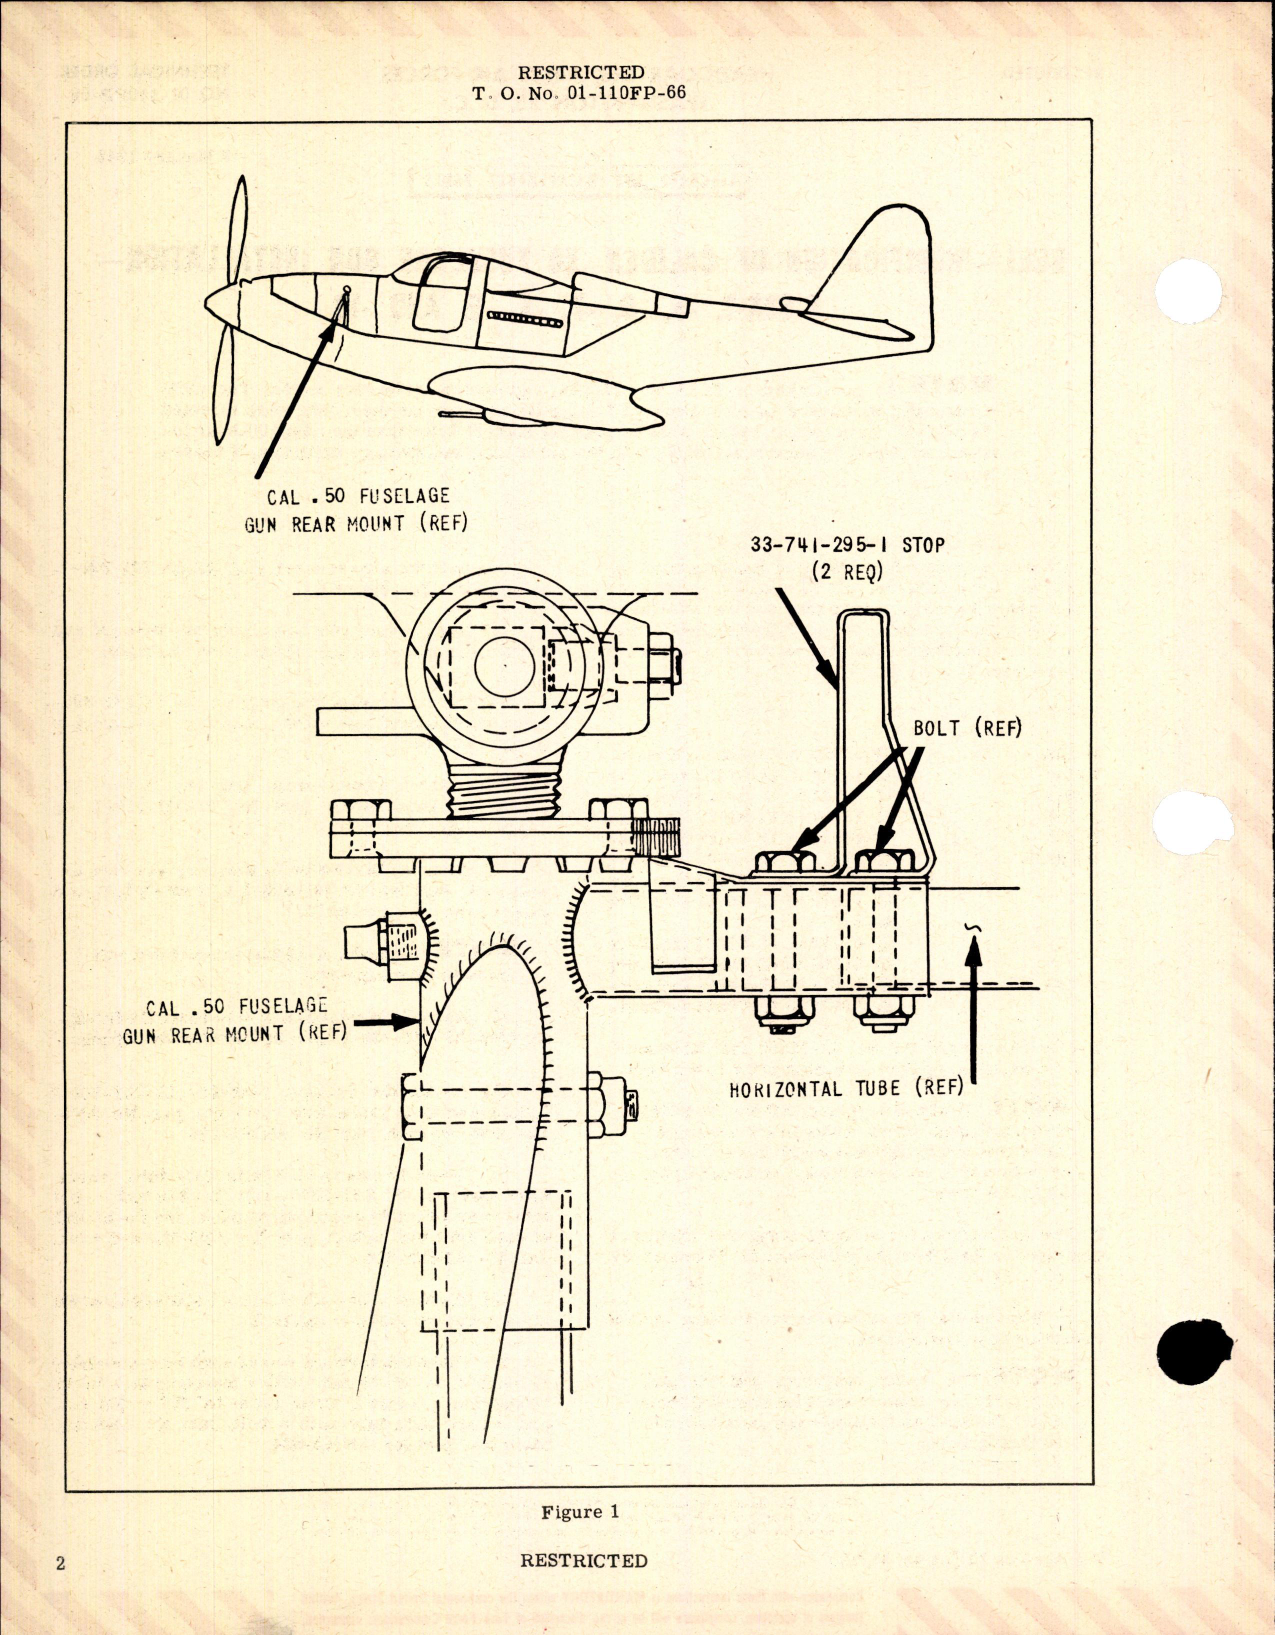 Sample page 2 from AirCorps Library document: Modification of Caliber .50 Fuselage Gun Installation